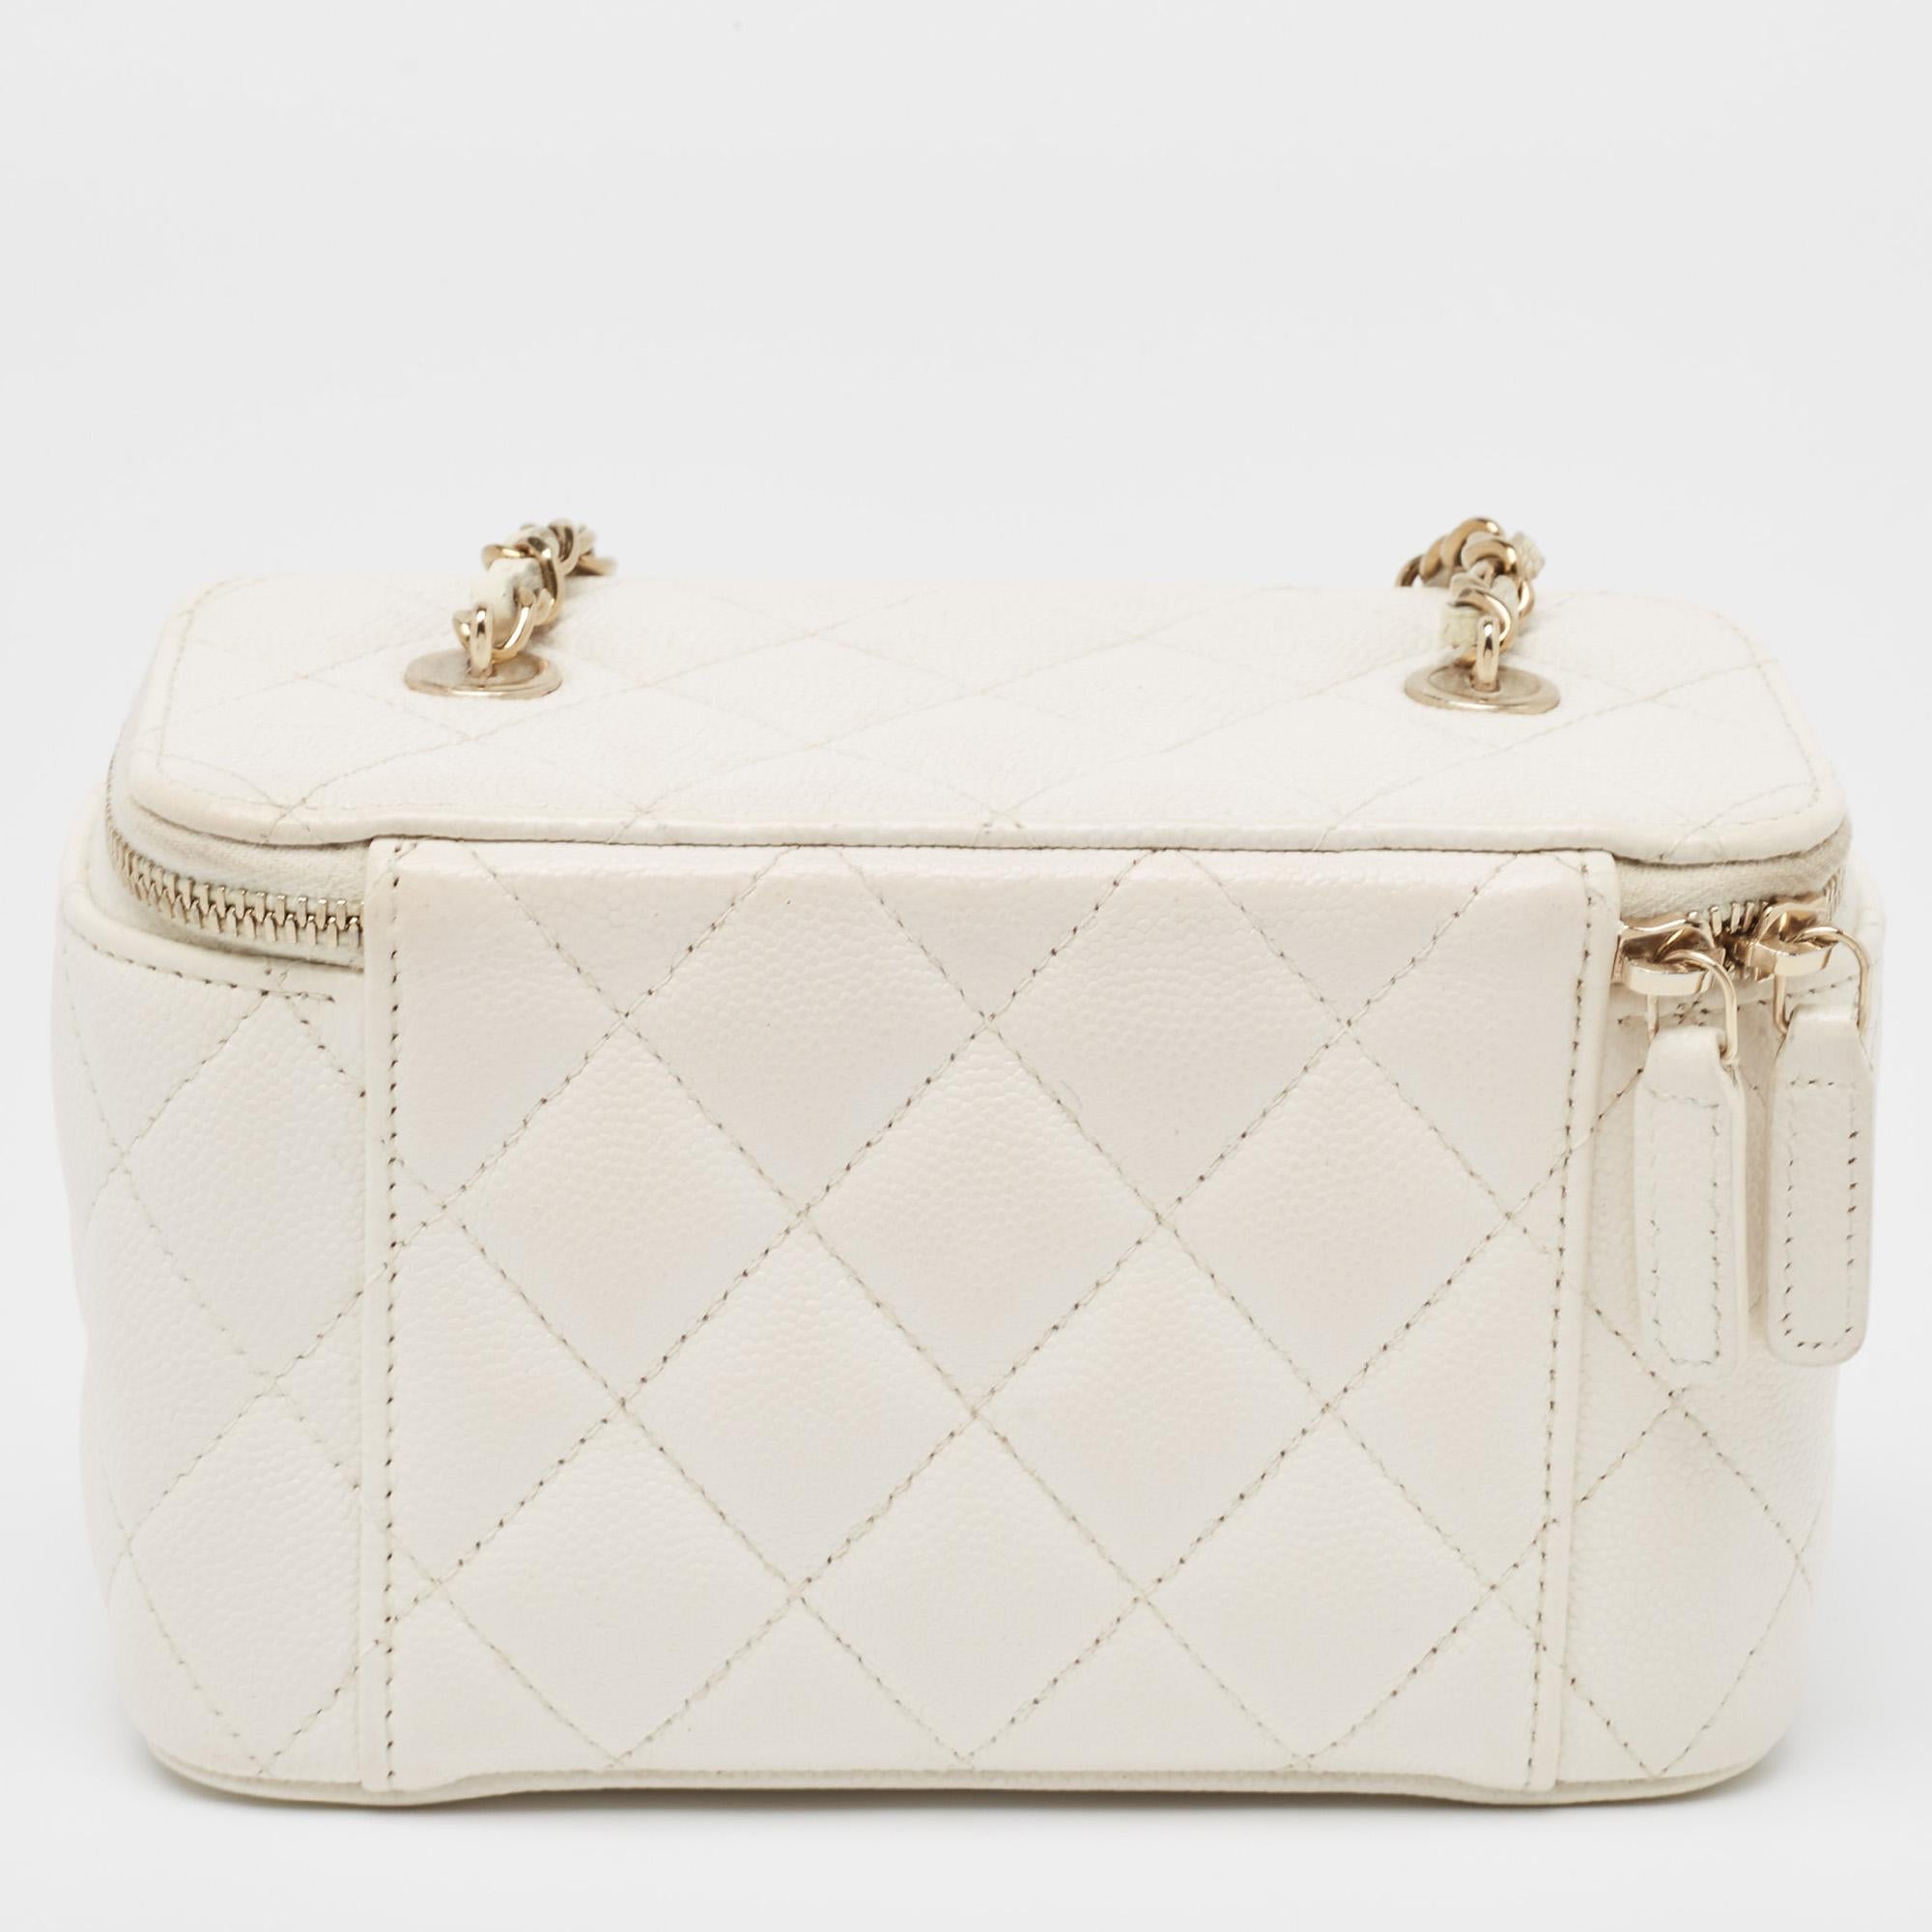 Chanel White Quilted Caviar Leather Small CC Vanity Case Bag 4